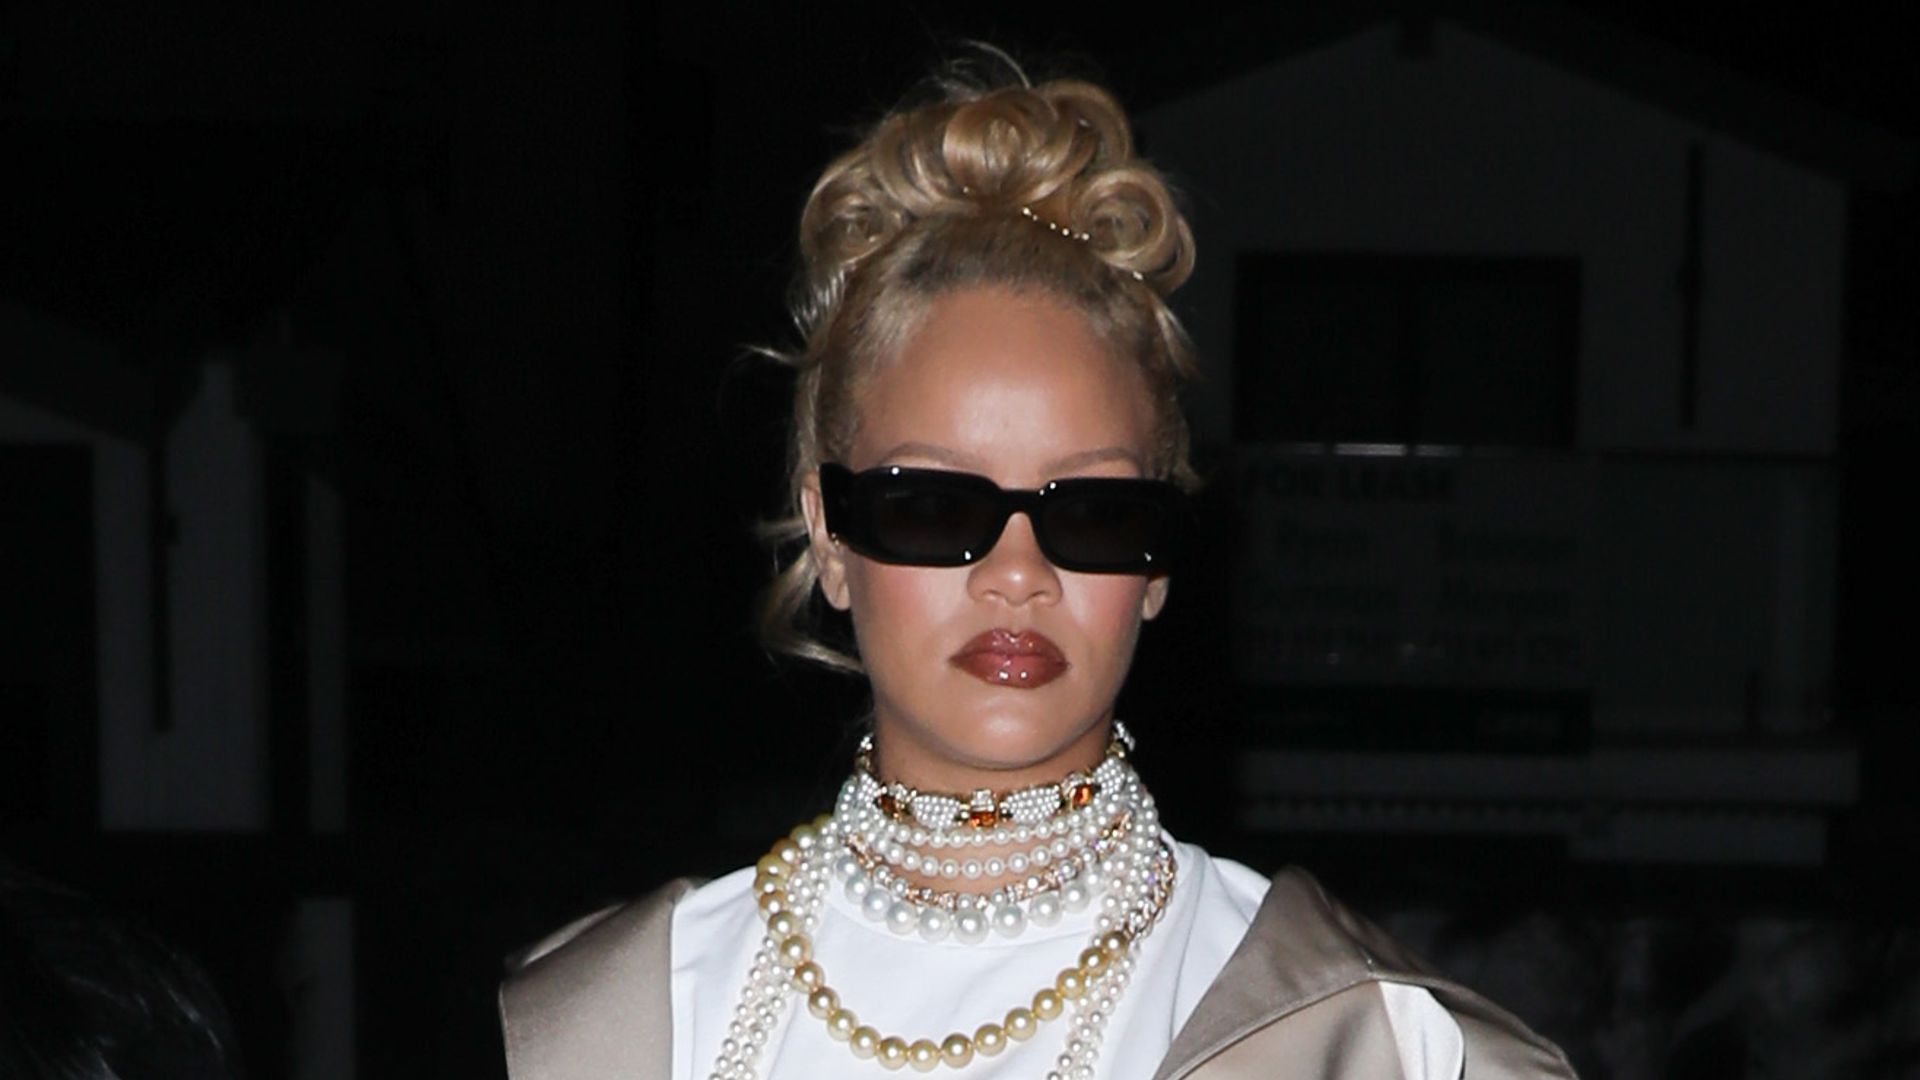 Rihanna looks unrecognizable as she drips in pearls and debuts punky blonde hair